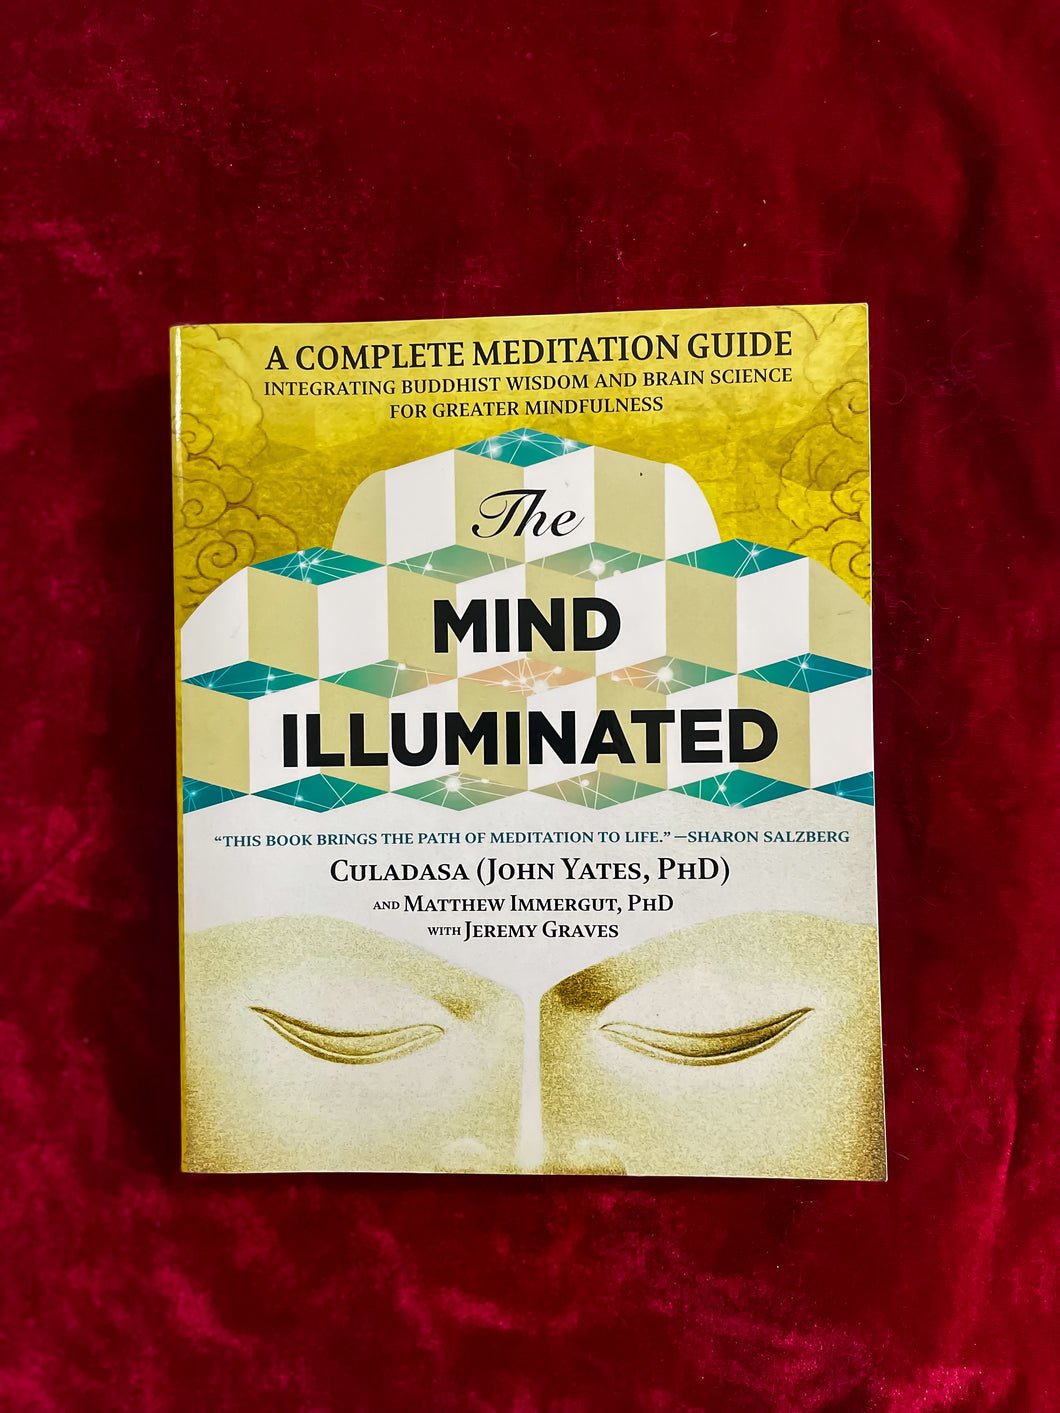 The Mind Illuminated: A Complete Meditation Guide Integrating Buddhist Wisdom and Brain Science for Greater